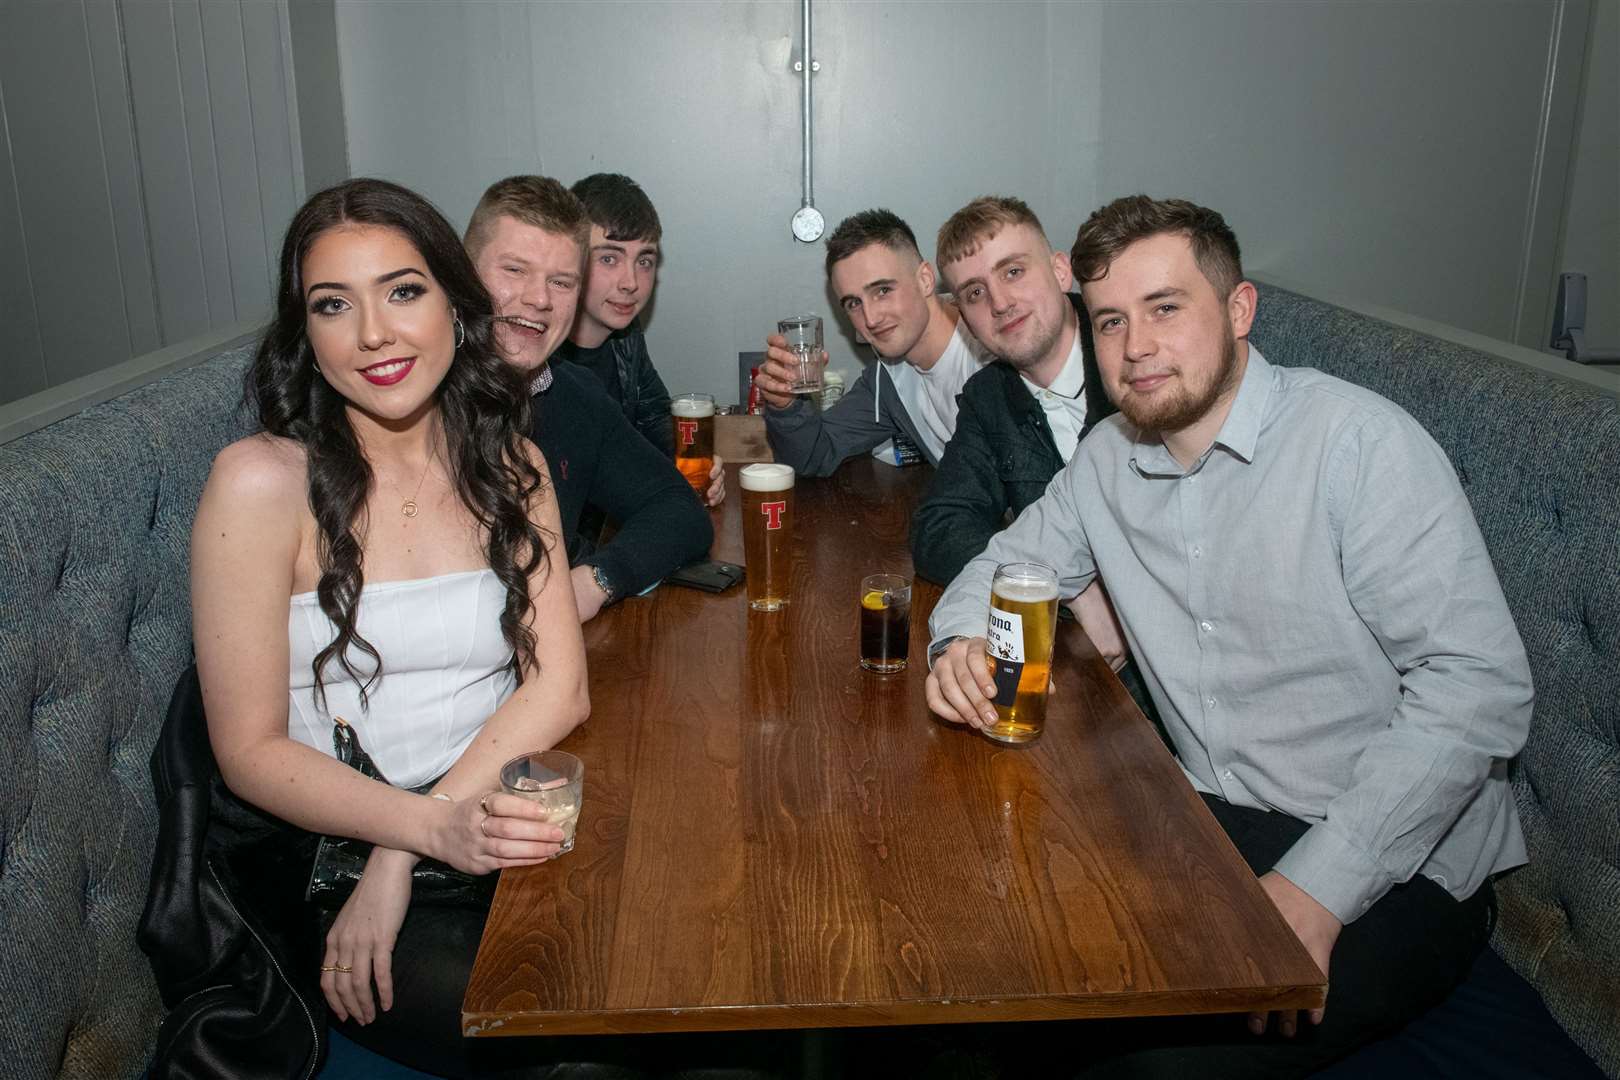 City Seen Night out for these friends Picture: Callum Mackay..